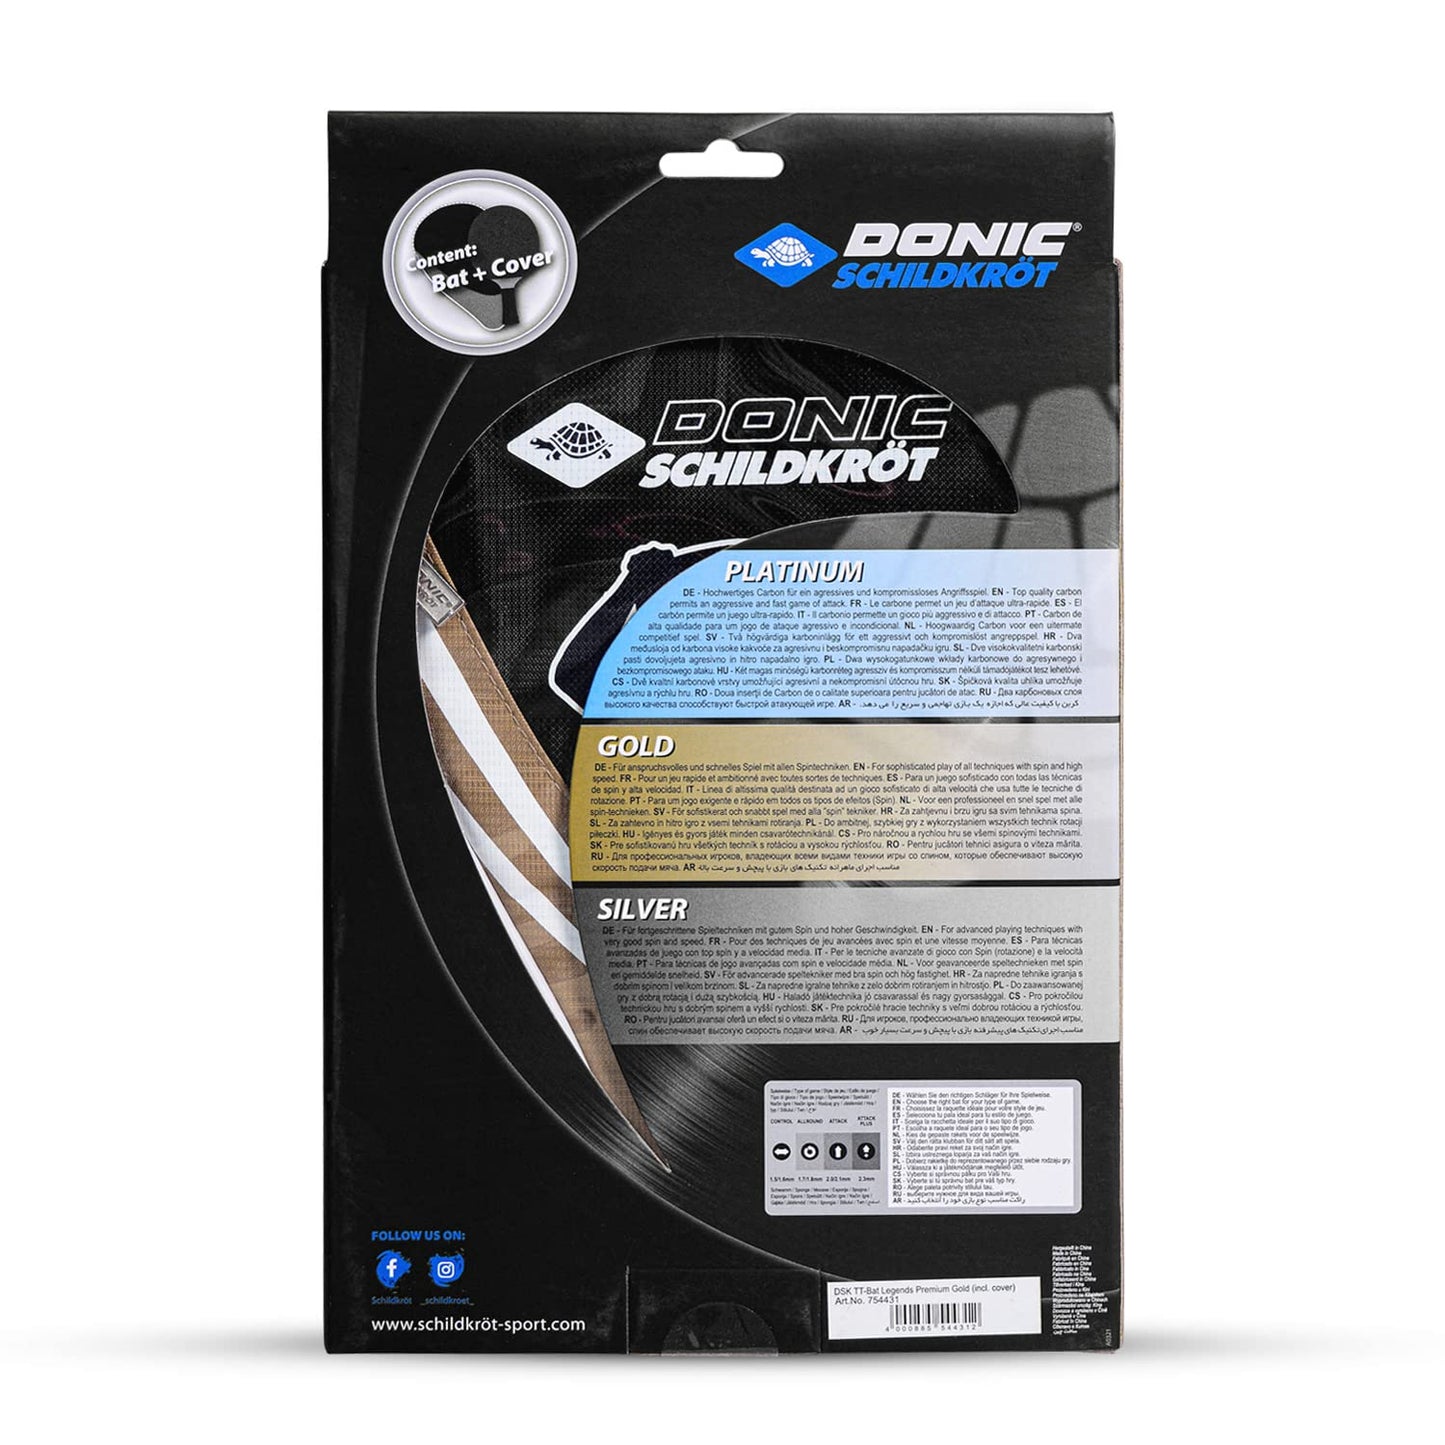 Donic Legends Gold Table Tennis Bat with Cover - Best Price online Prokicksports.com